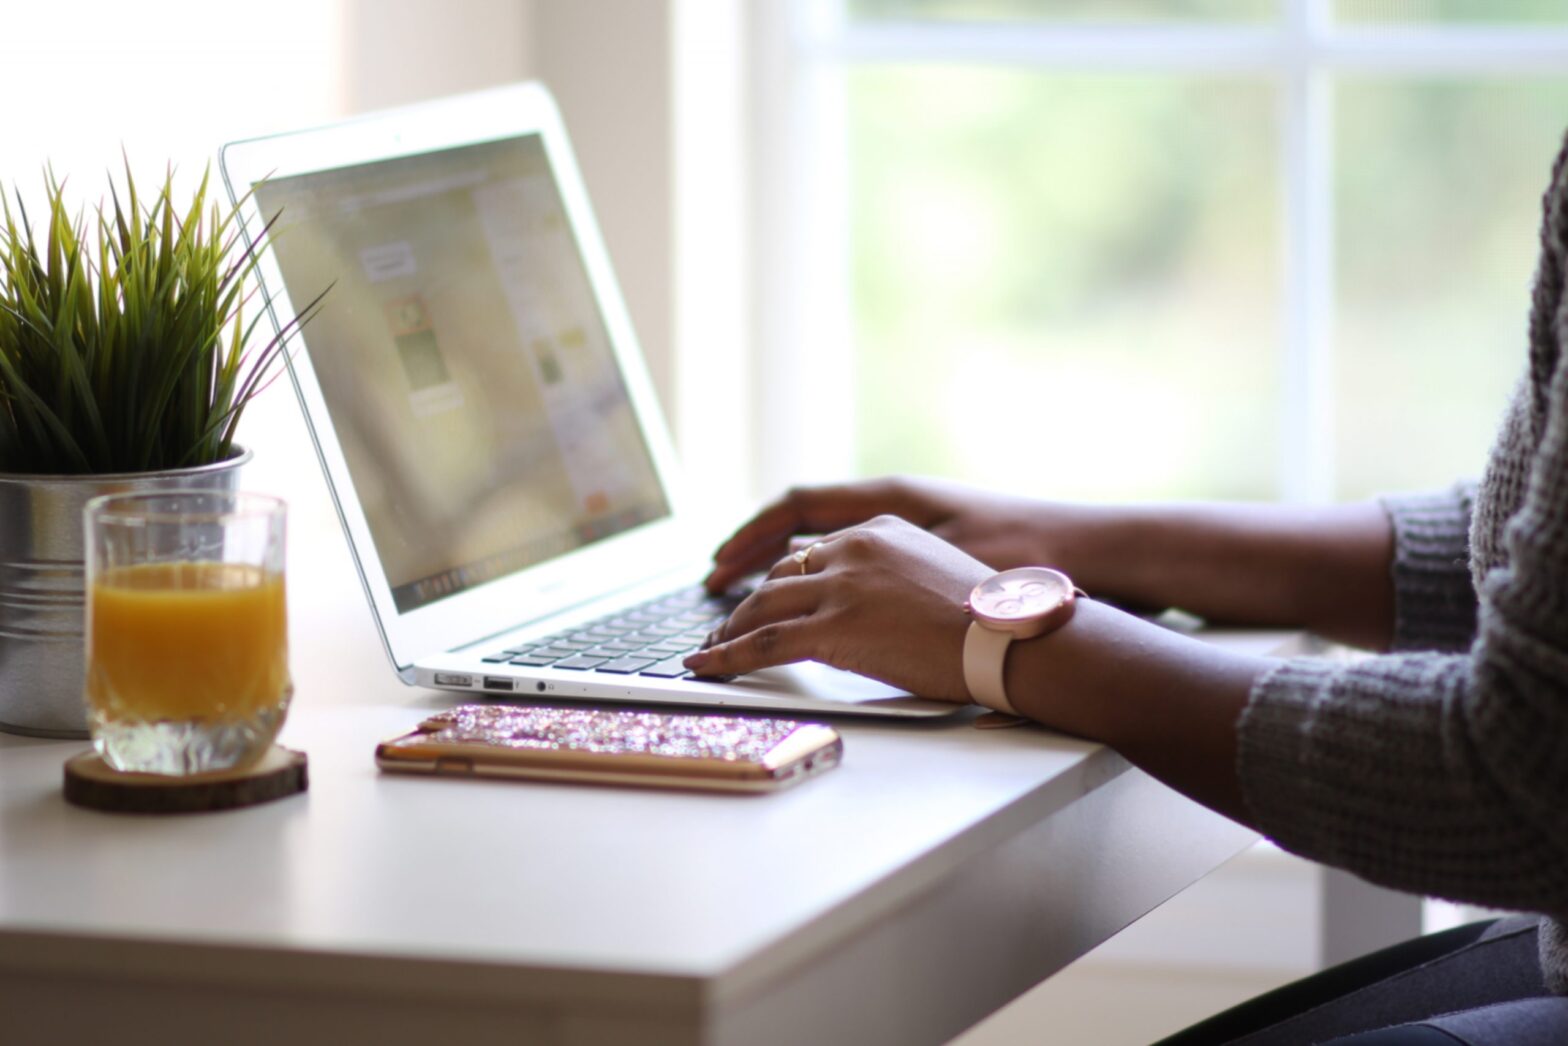 A Black woman's hands type on a silver laptop in front of a window with trees outside in the background and a glass of orange juice and a green plant and a cell phone on the desk beside the laptop. The woman is wearing a watch and a grey sweater.